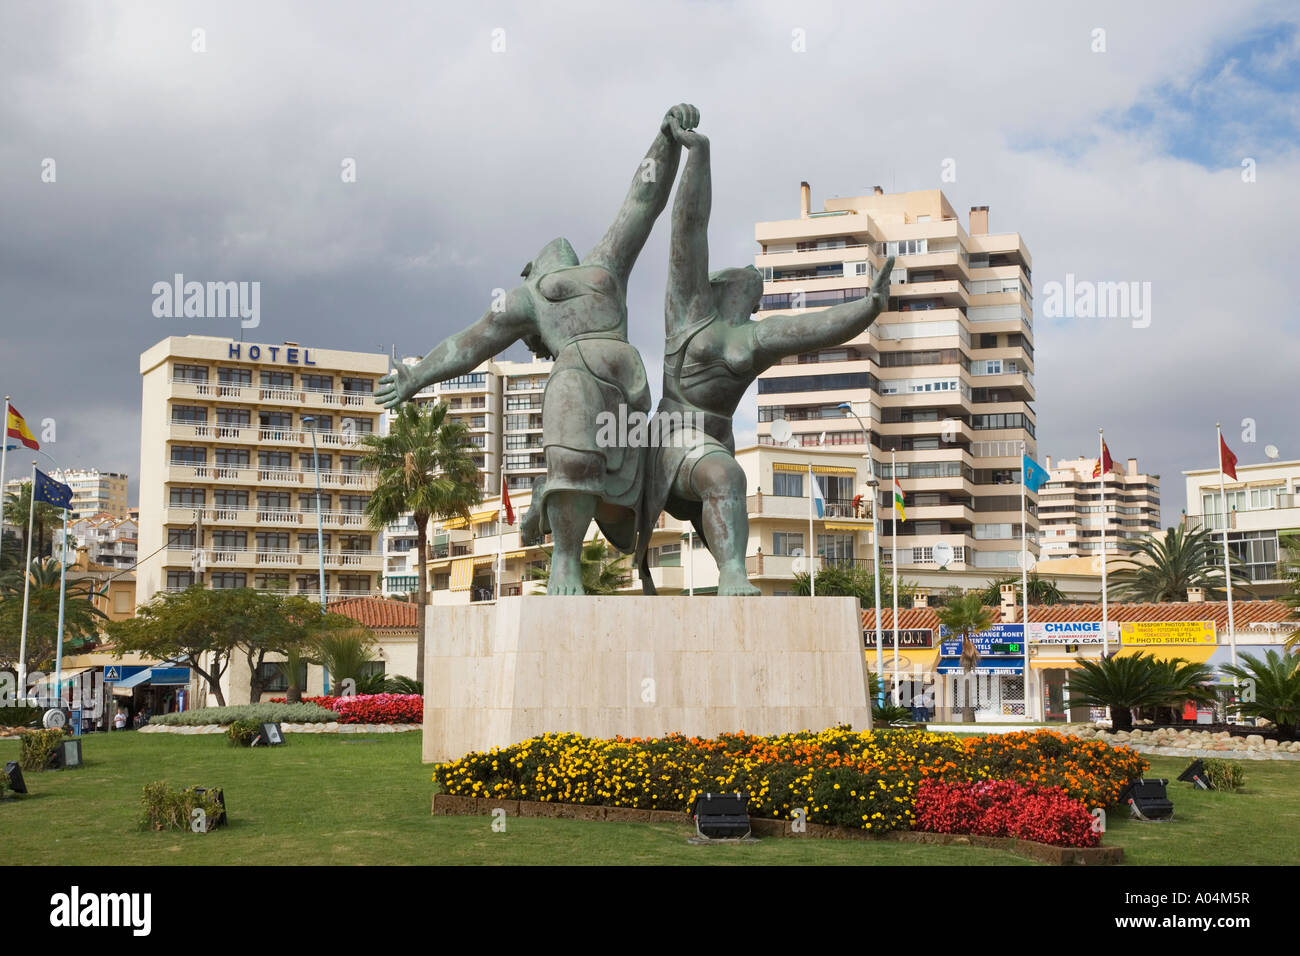 Torremolinos Costa del Sol Malaga Province Spain Statue of Pablo Picasso painting Two Women Running on the Beach Stock Photo